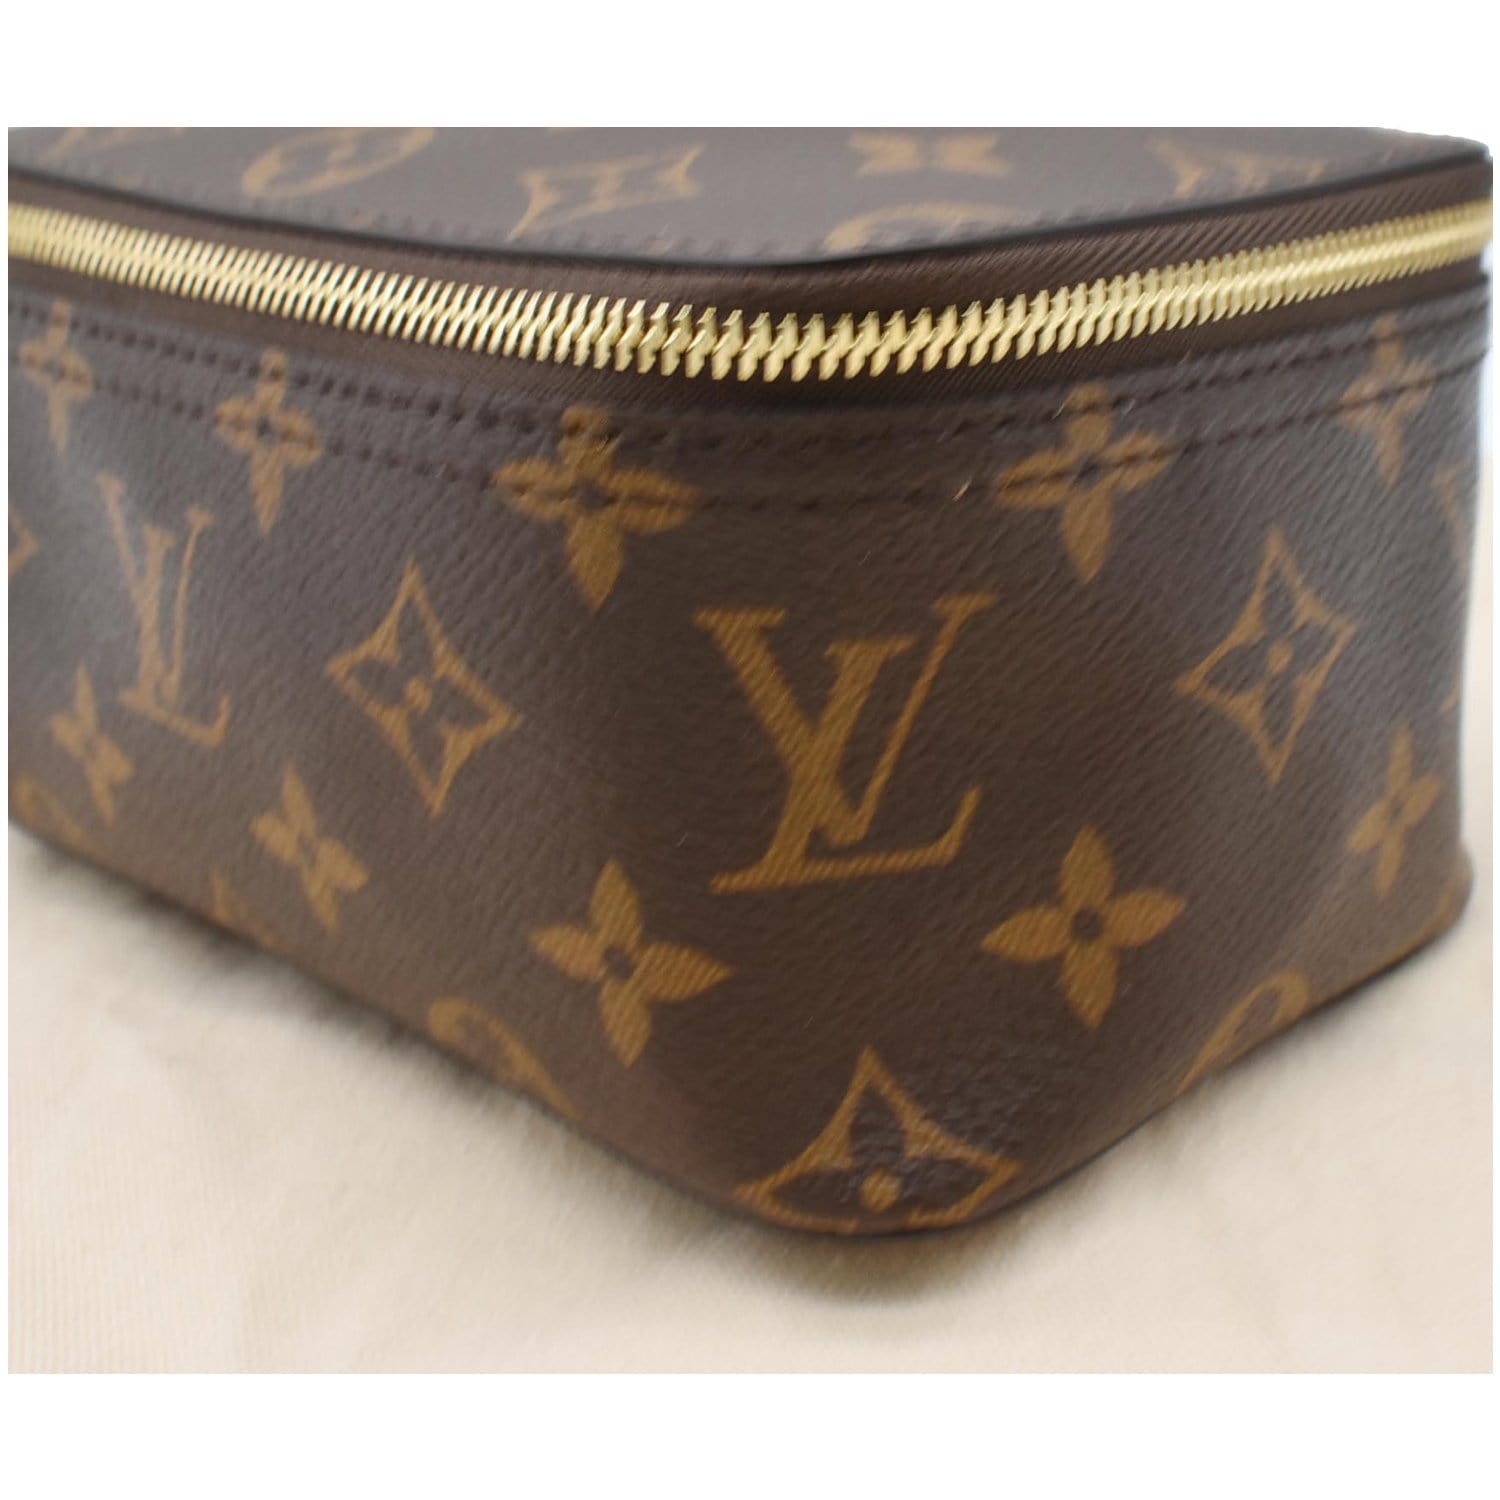 What's In My Makeup Bag (lv Cosmetic Pouch Pm)